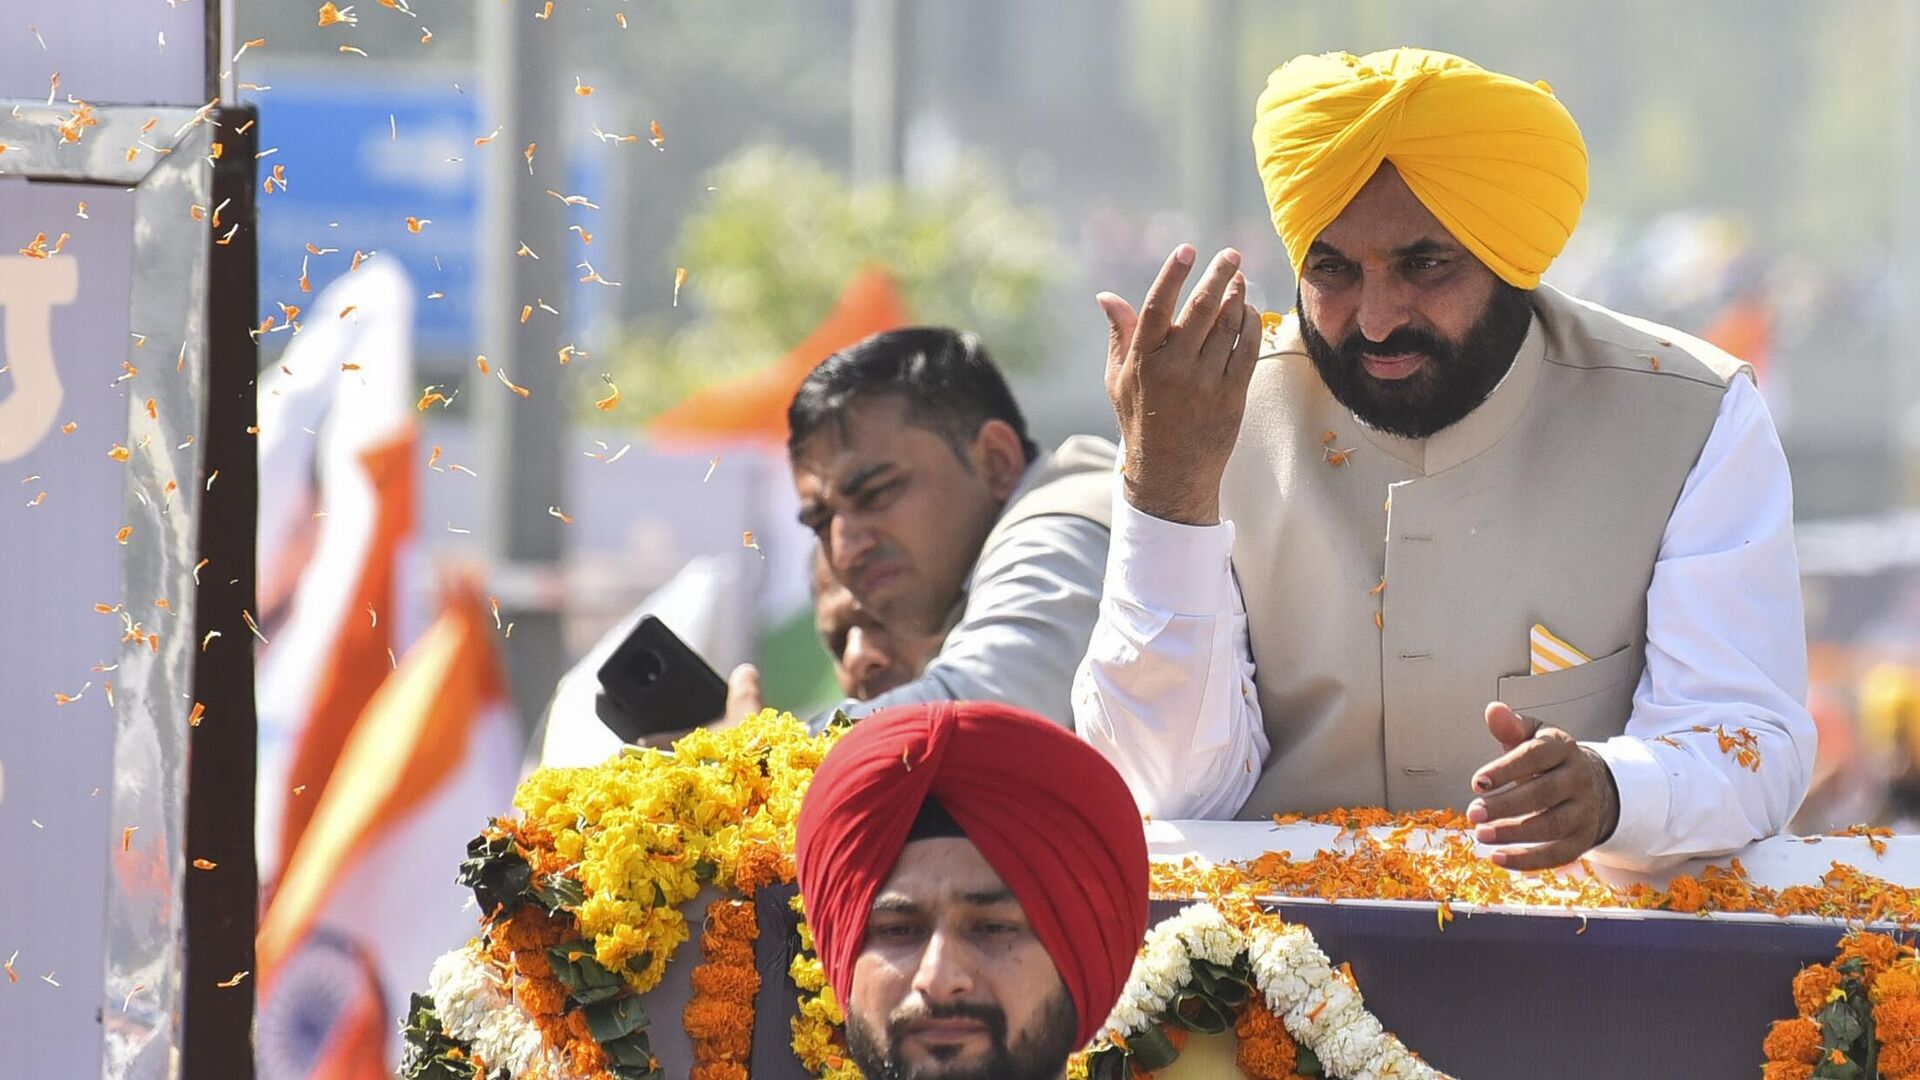 Bhagwant Mann greets supporters during a road show as they celebrate party's victory in the state Assembly elections, in Amritsar, India, Sunday, March 13, 2022 - Sputnik International, 1920, 28.03.2022